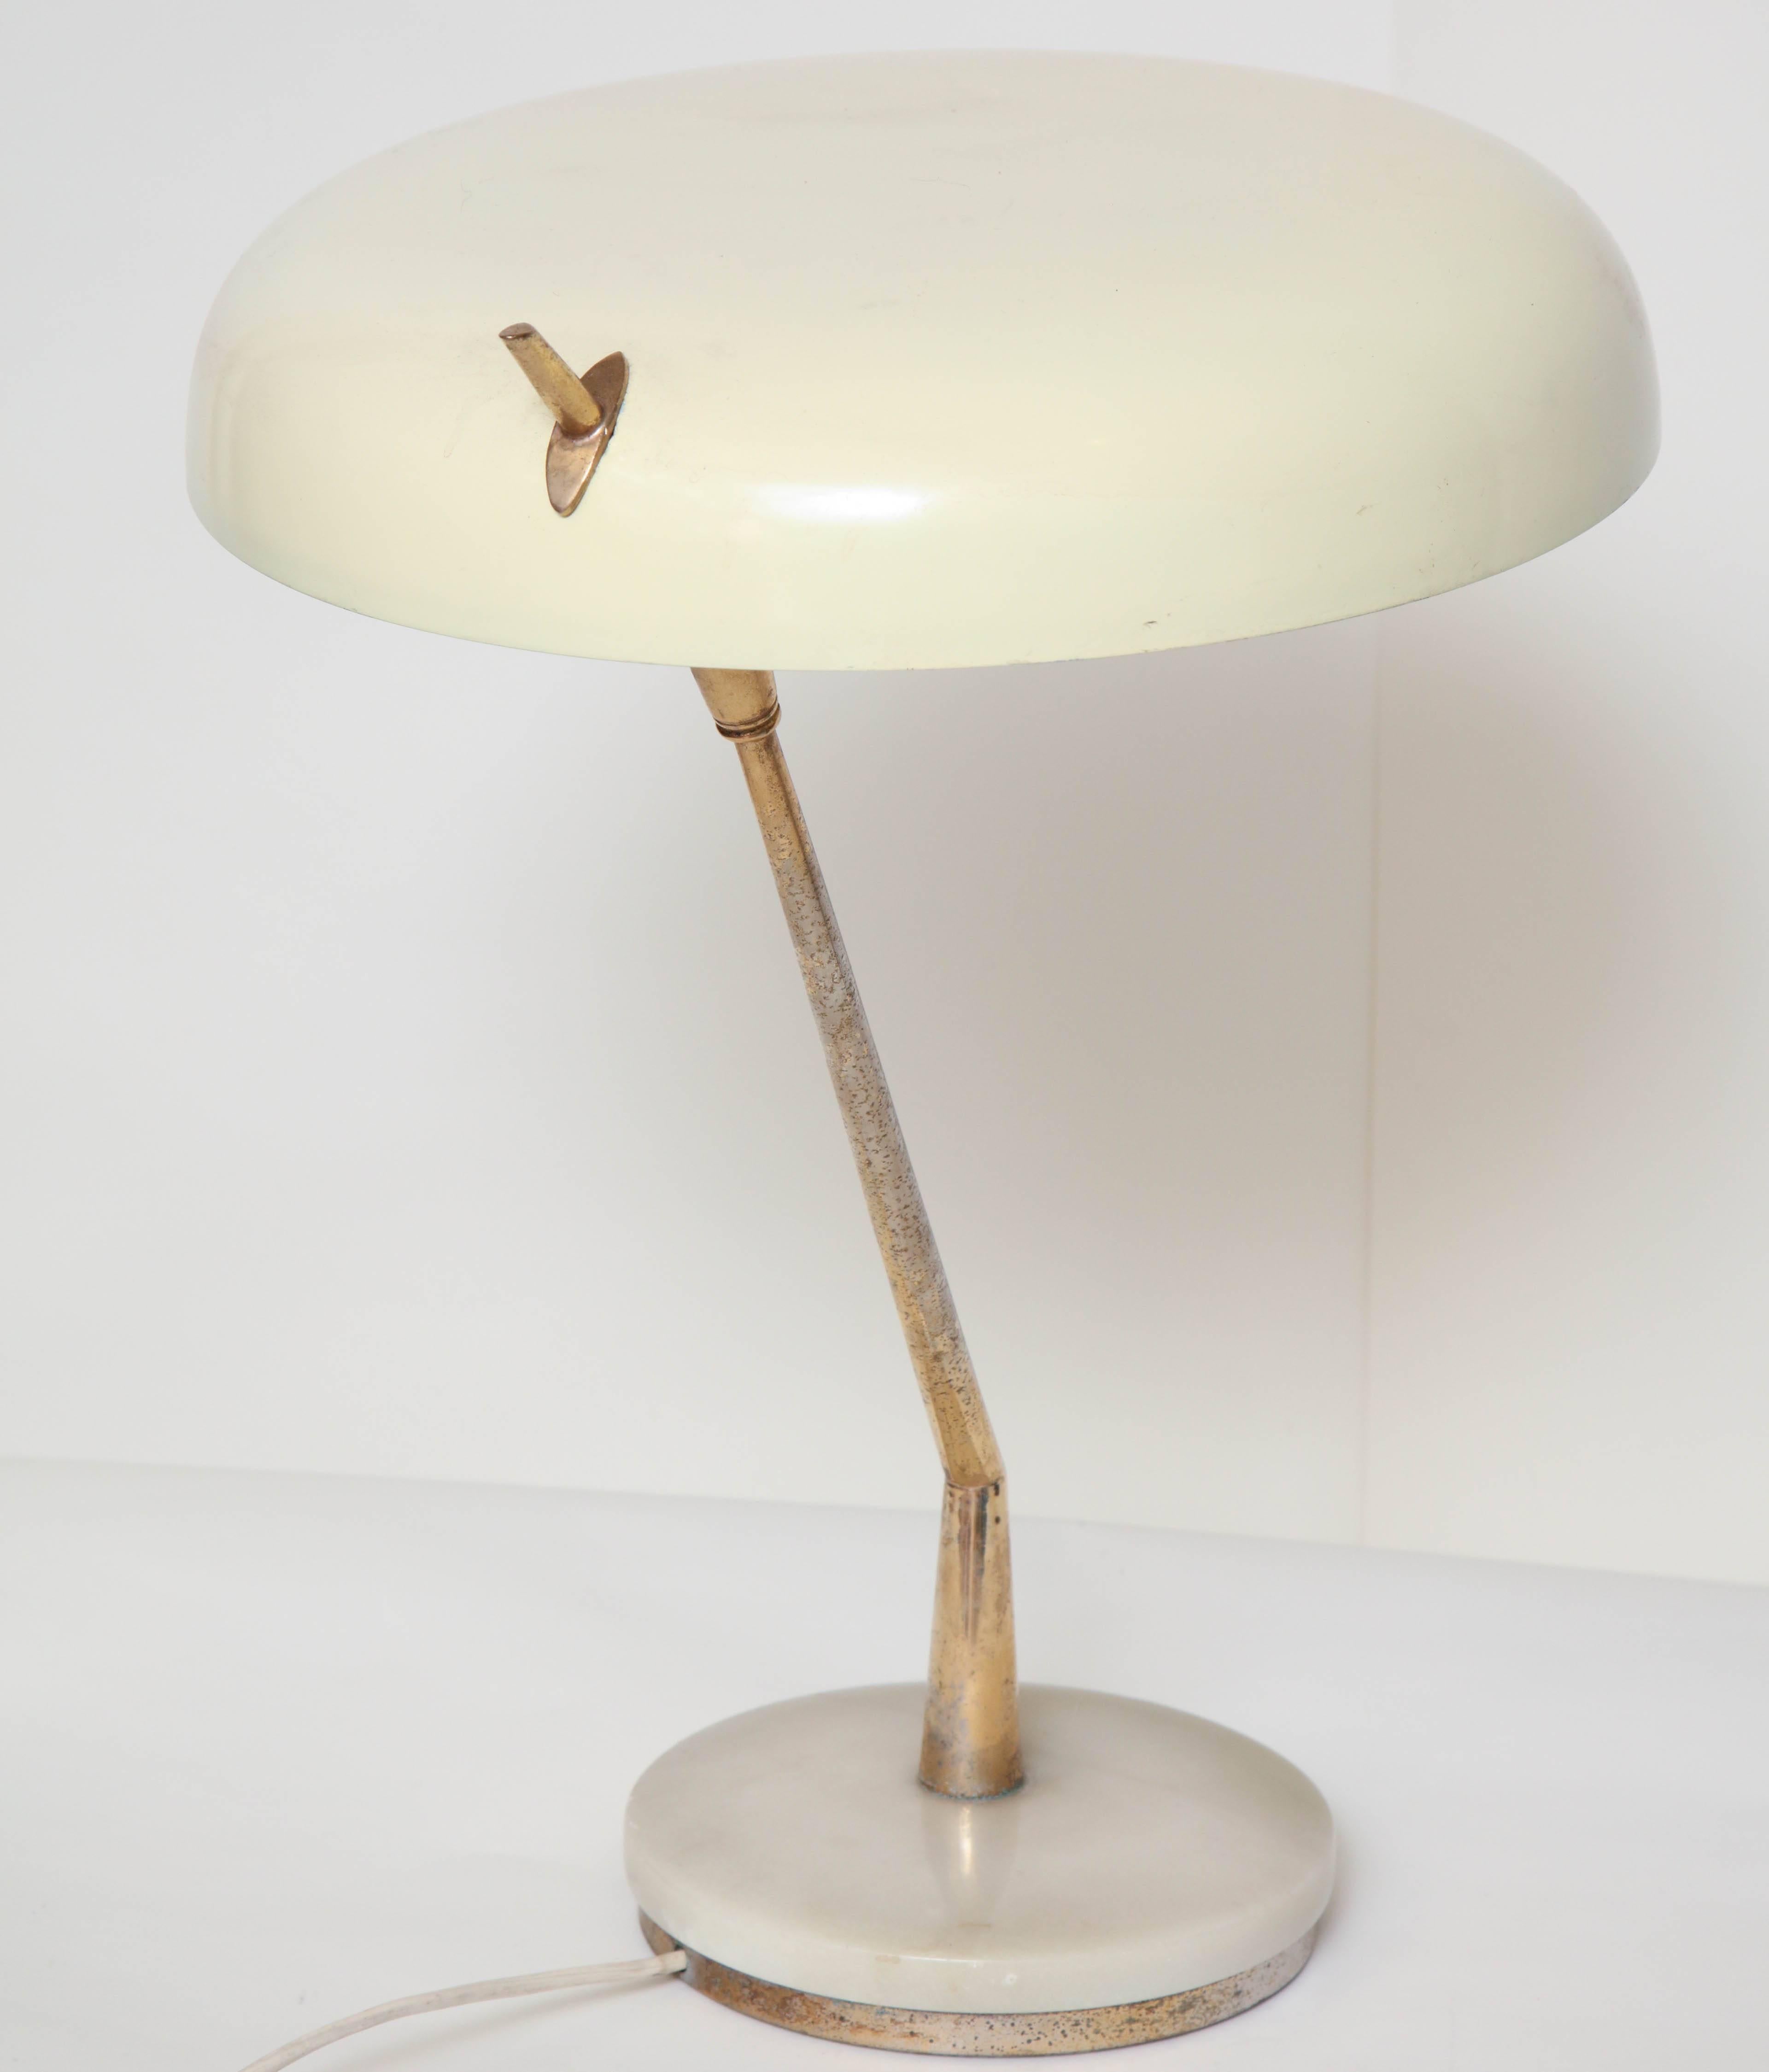 Metal Articulated Table Lamp Attributed to Arredoluce Italian Mid-Century Modern, 1950